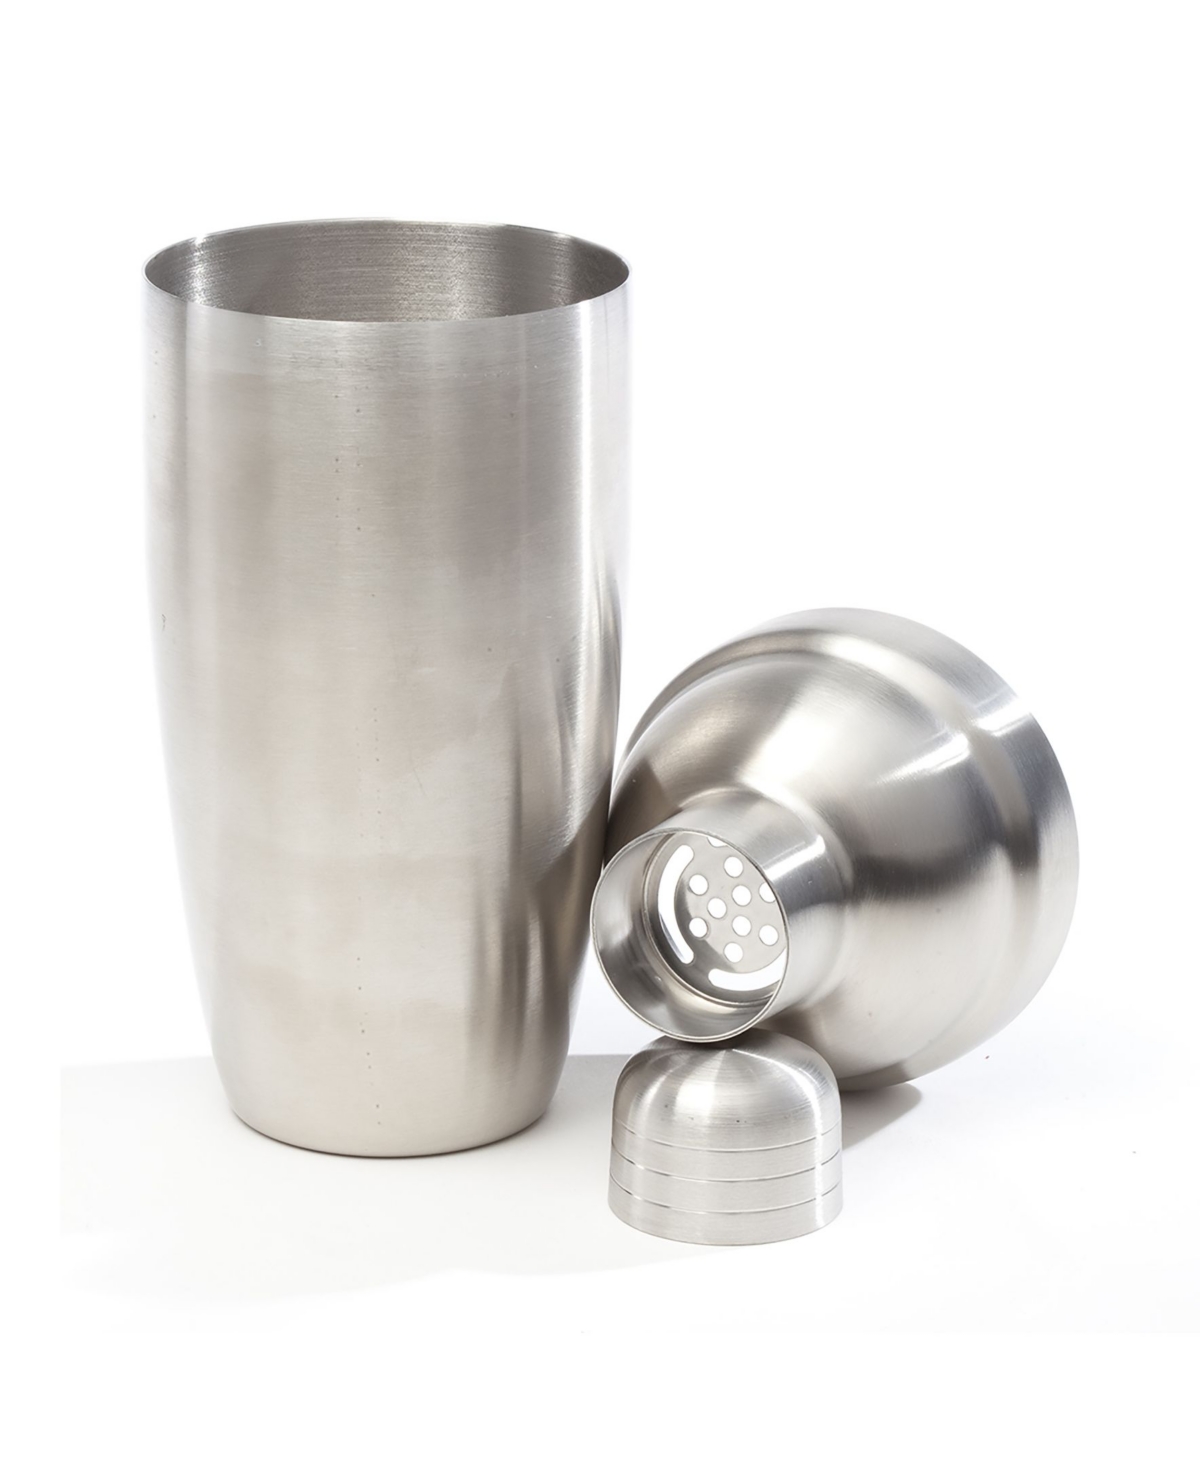 Oenophilia Cocktail Shaker Stainless Steel